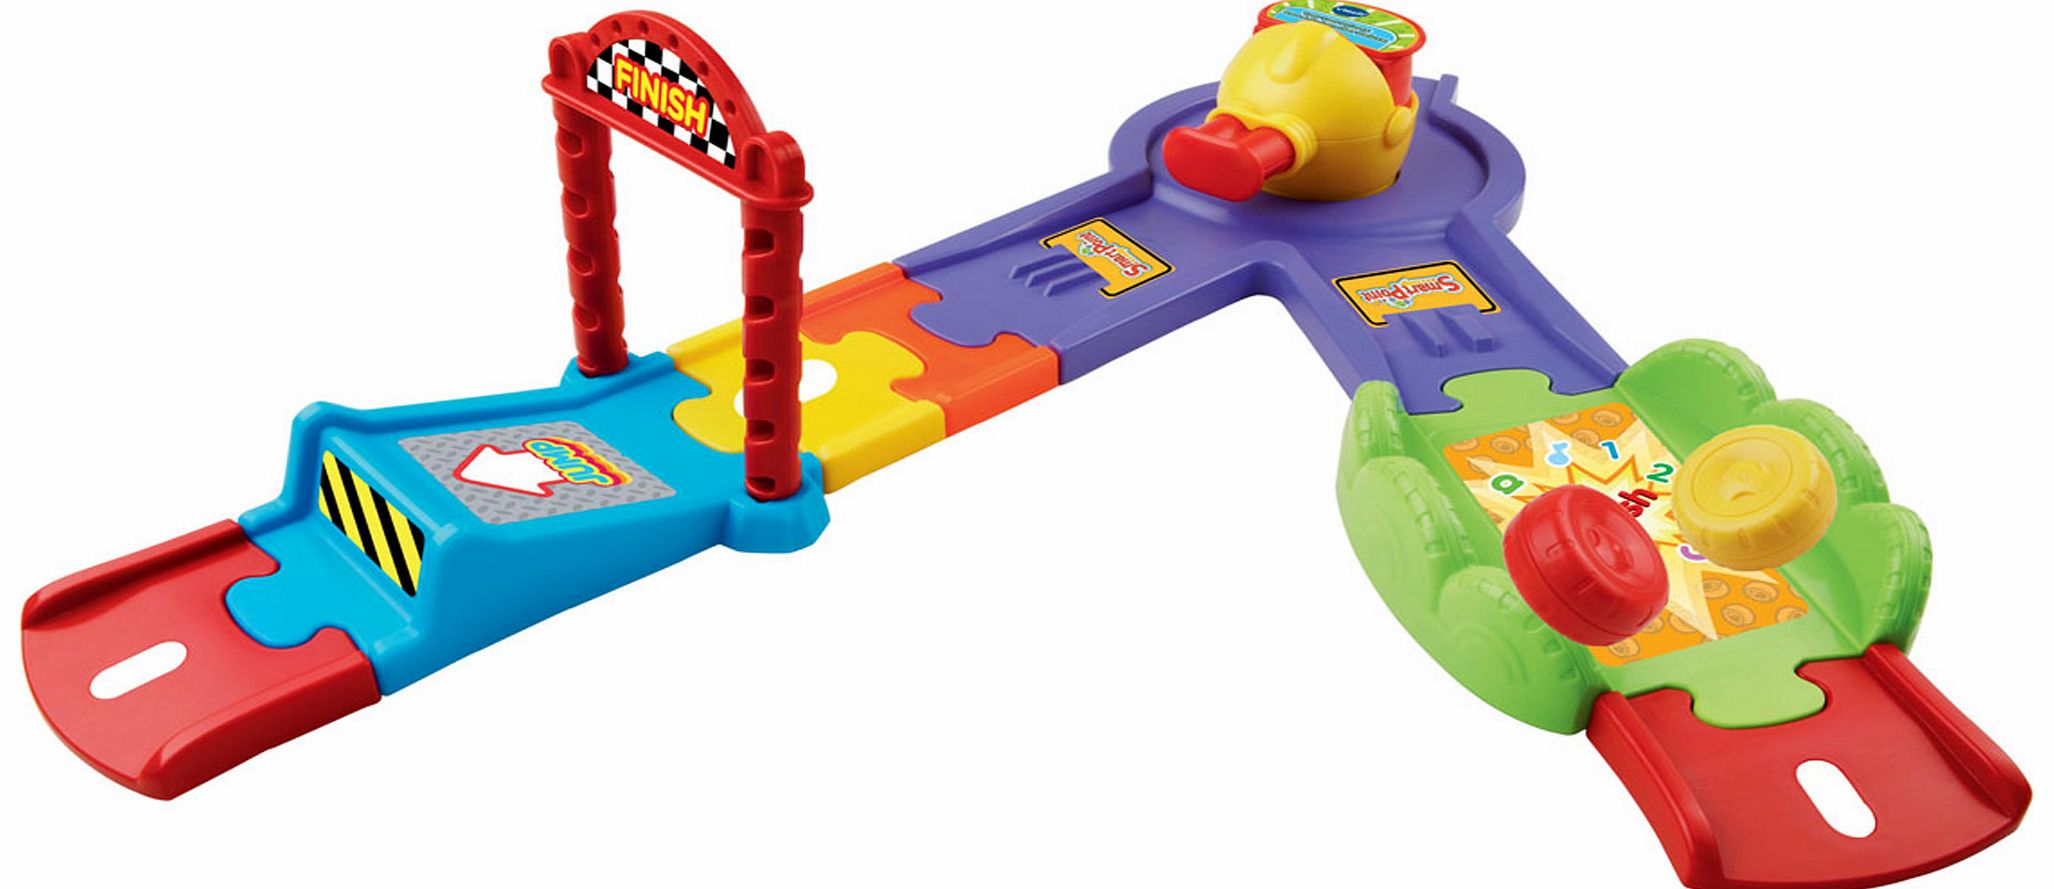 Vtech Toot-Toot Drivers Deluxe Jump Track Launcher